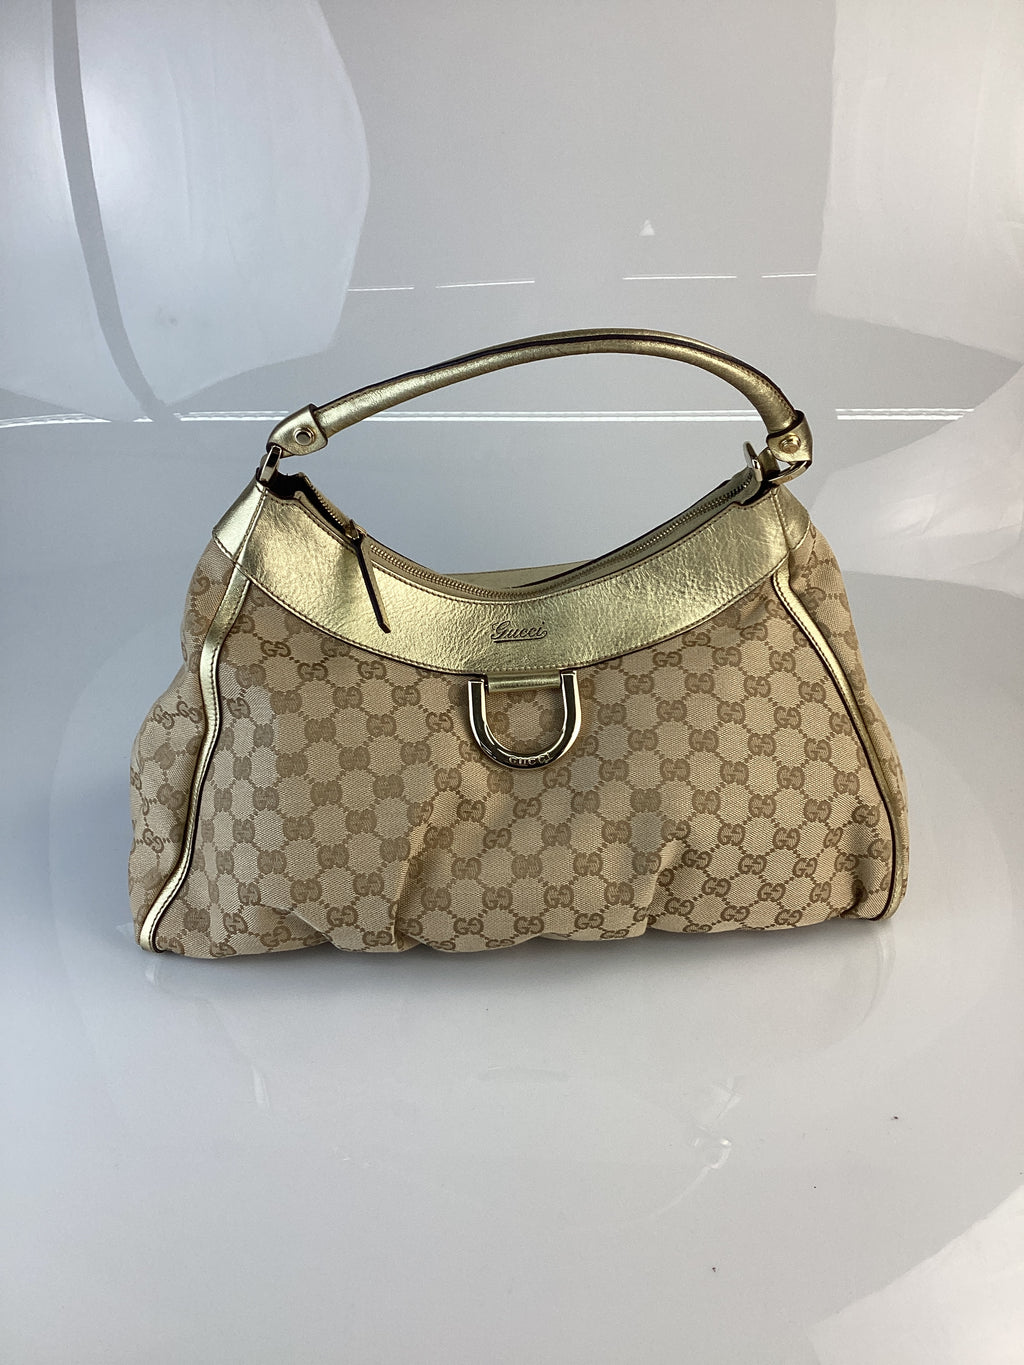 PRELOVED Gucci GG Canvas Abbey D-Ring Shoulder Bag WBKGDBH 041224 B